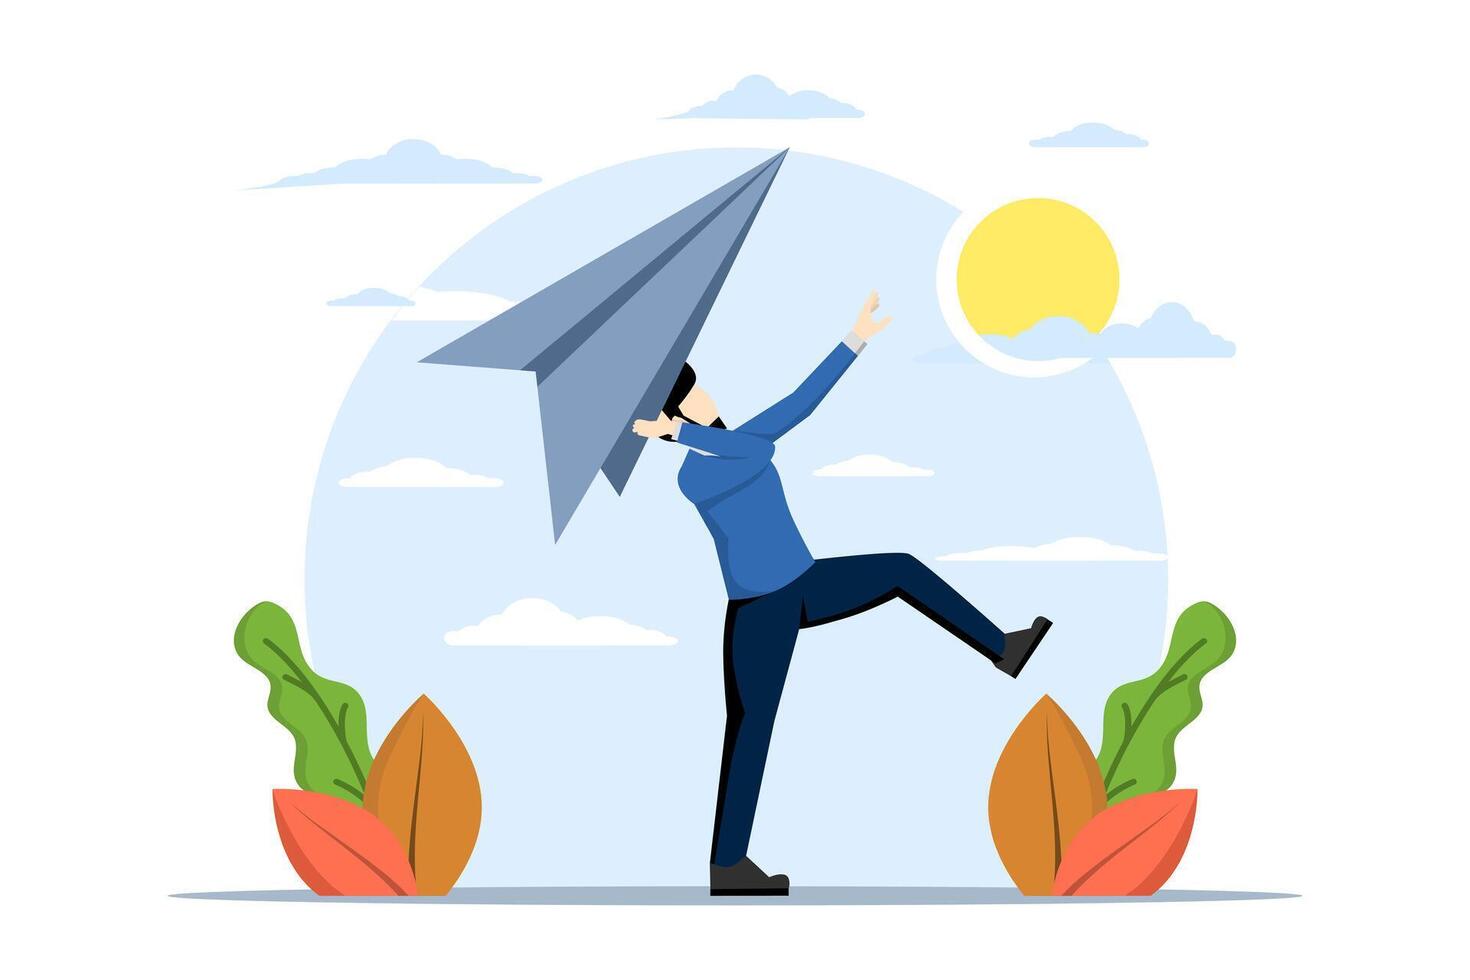 Concept of Starting a new business, ambitious businessman running a big paper airplane startup or entrepreneurship, creativity and inspiration to achieve business success concept. vector illustration.